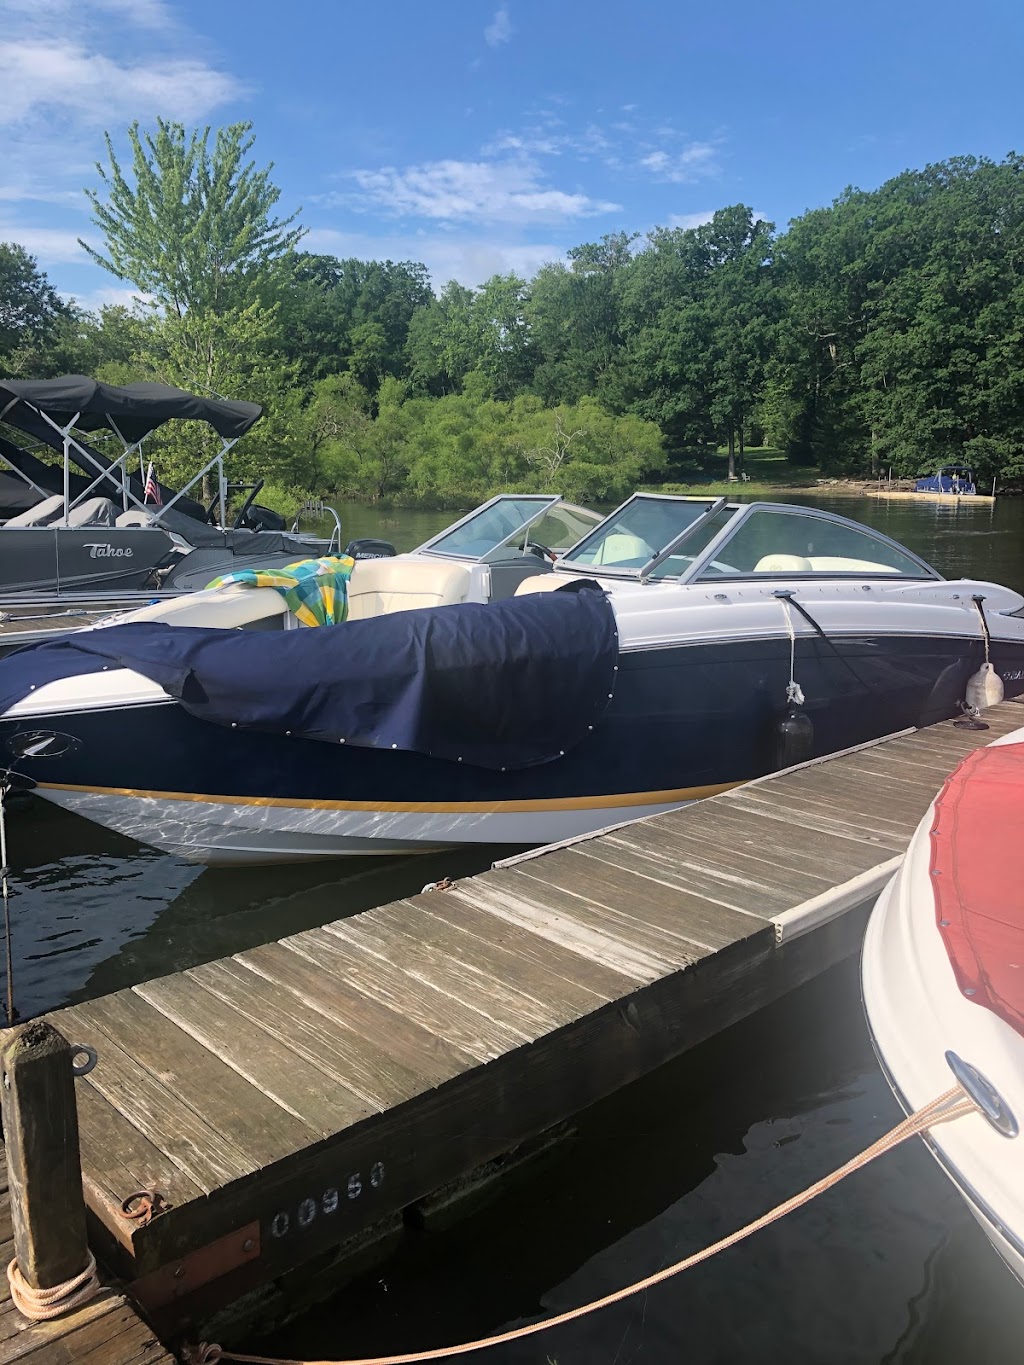 Holiday Cottages and Boat Slips on Lake Wallenpaupack | 100 Holiday Ln, Tafton, PA 18464 | Phone: (570) 650-7401